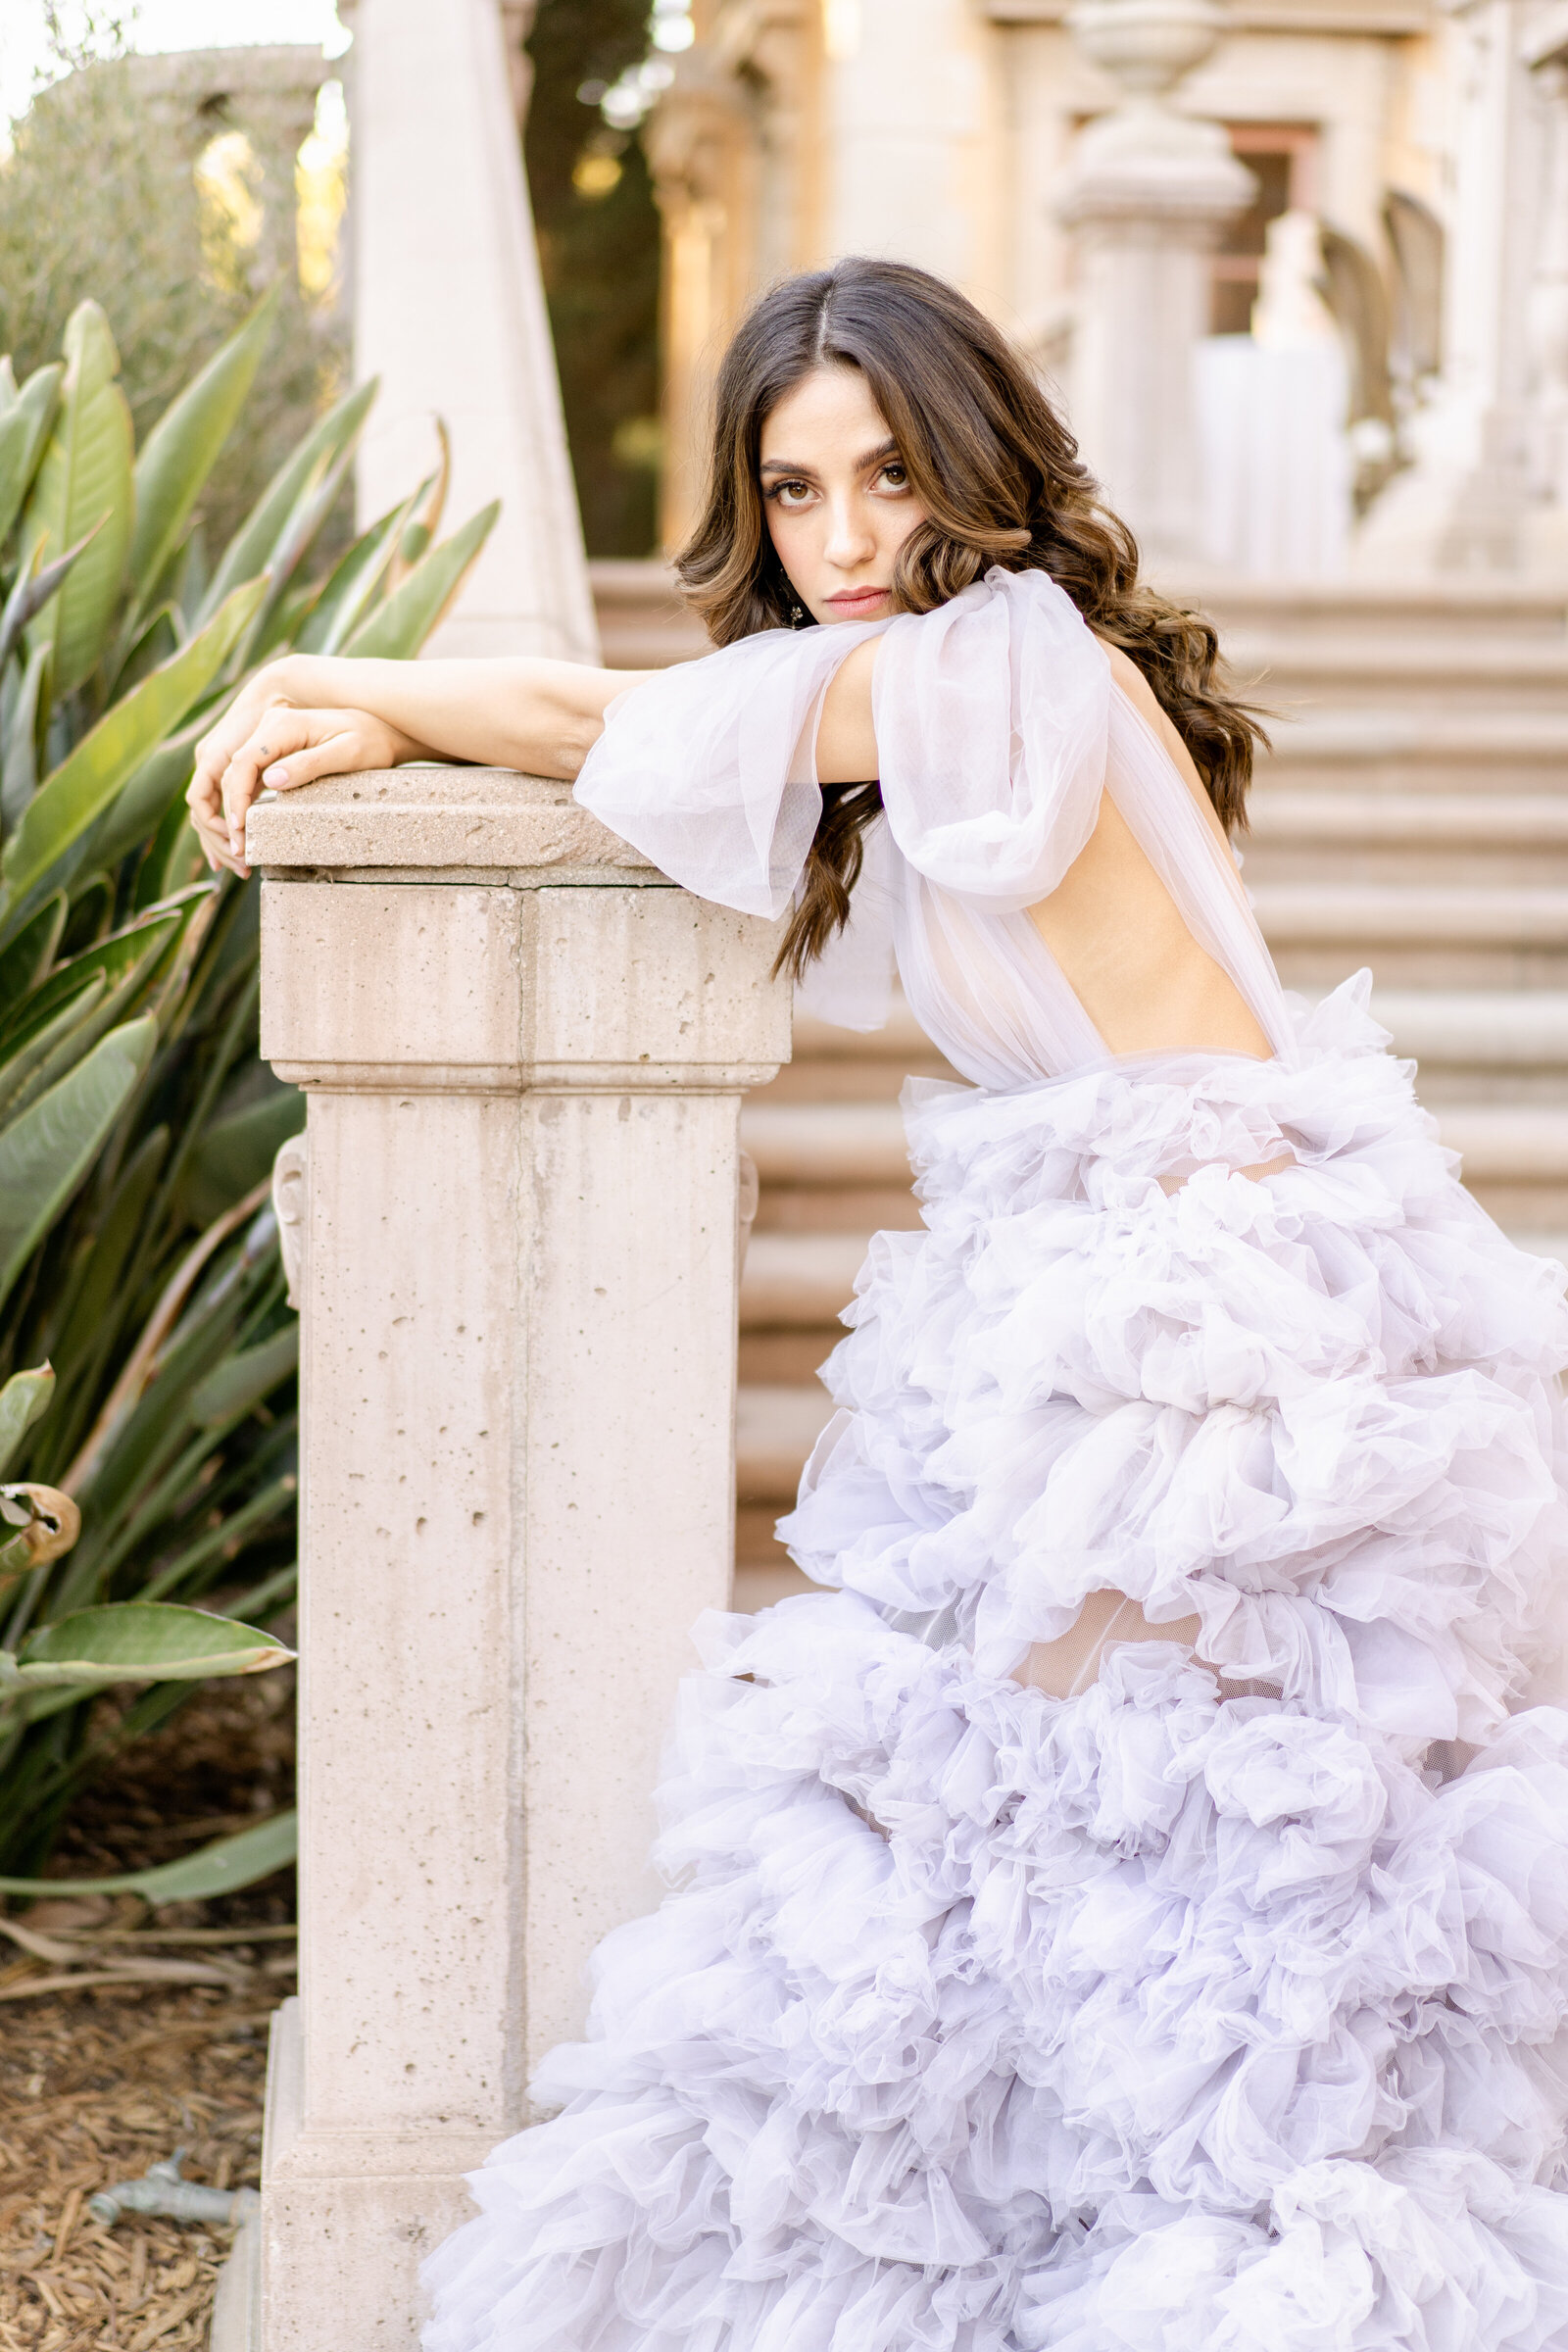 Portrait of bride in a lavender gown in front of concrete steps outdoors